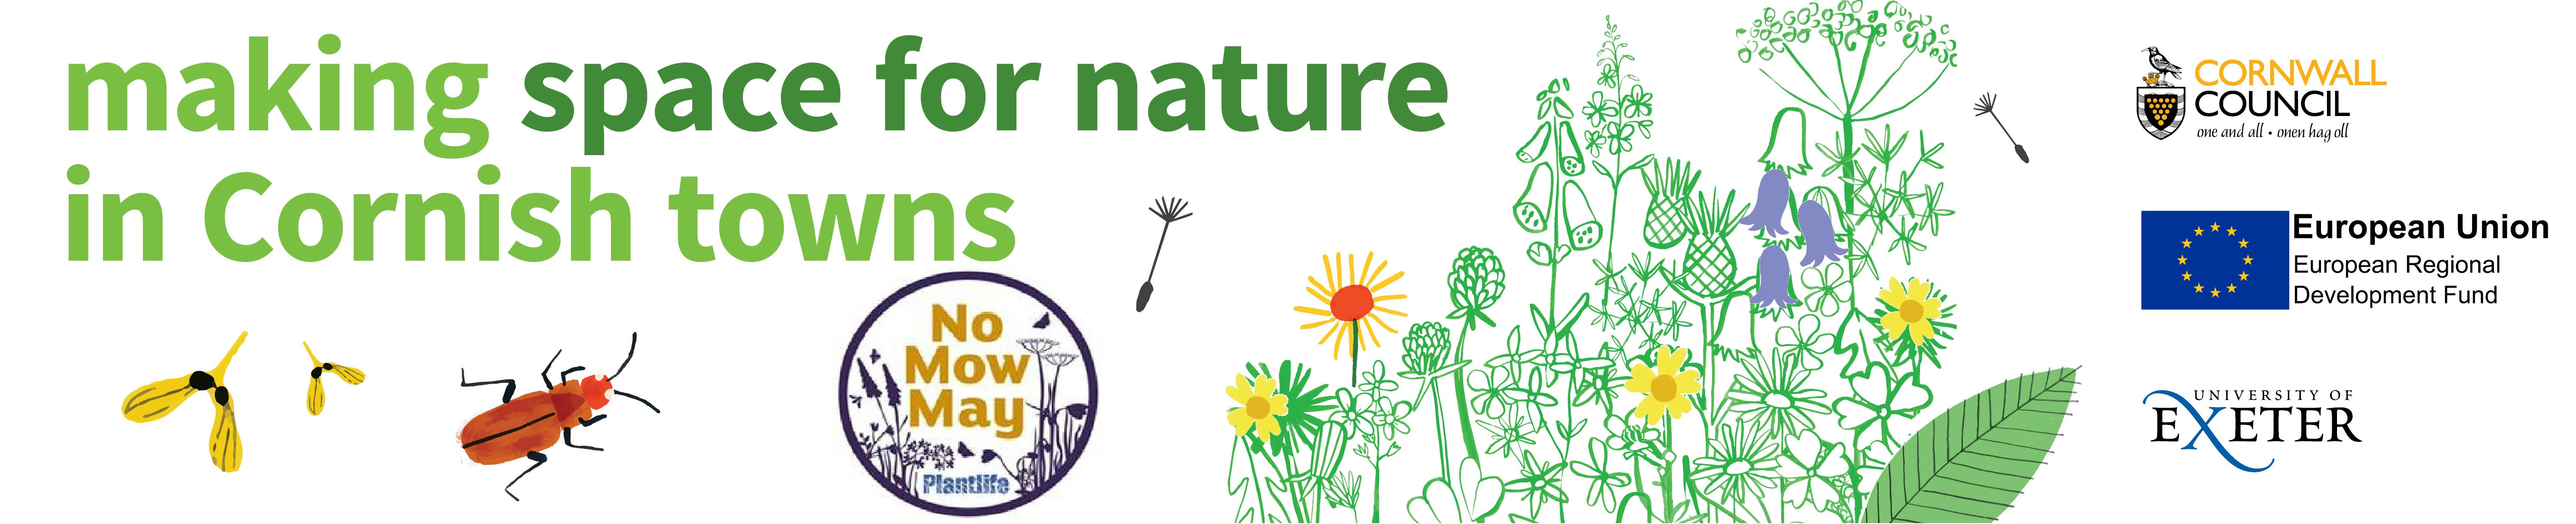 Making Space for Nature banner and No Mow May